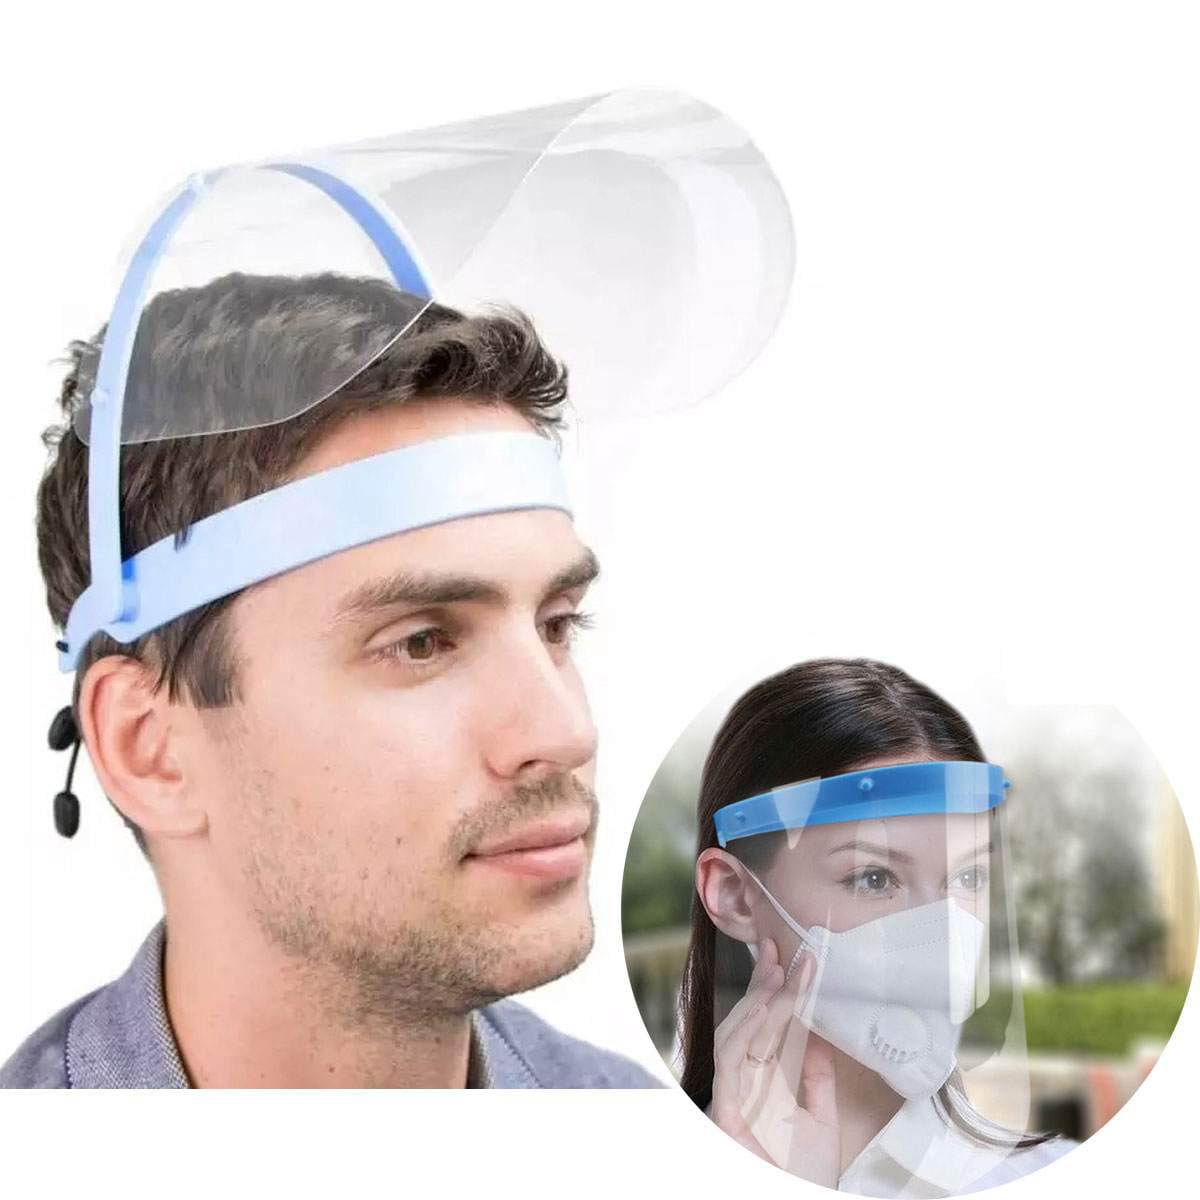 Gizmo Supply Adjustable Full Face Shield with 10 Clear Detachable Visors